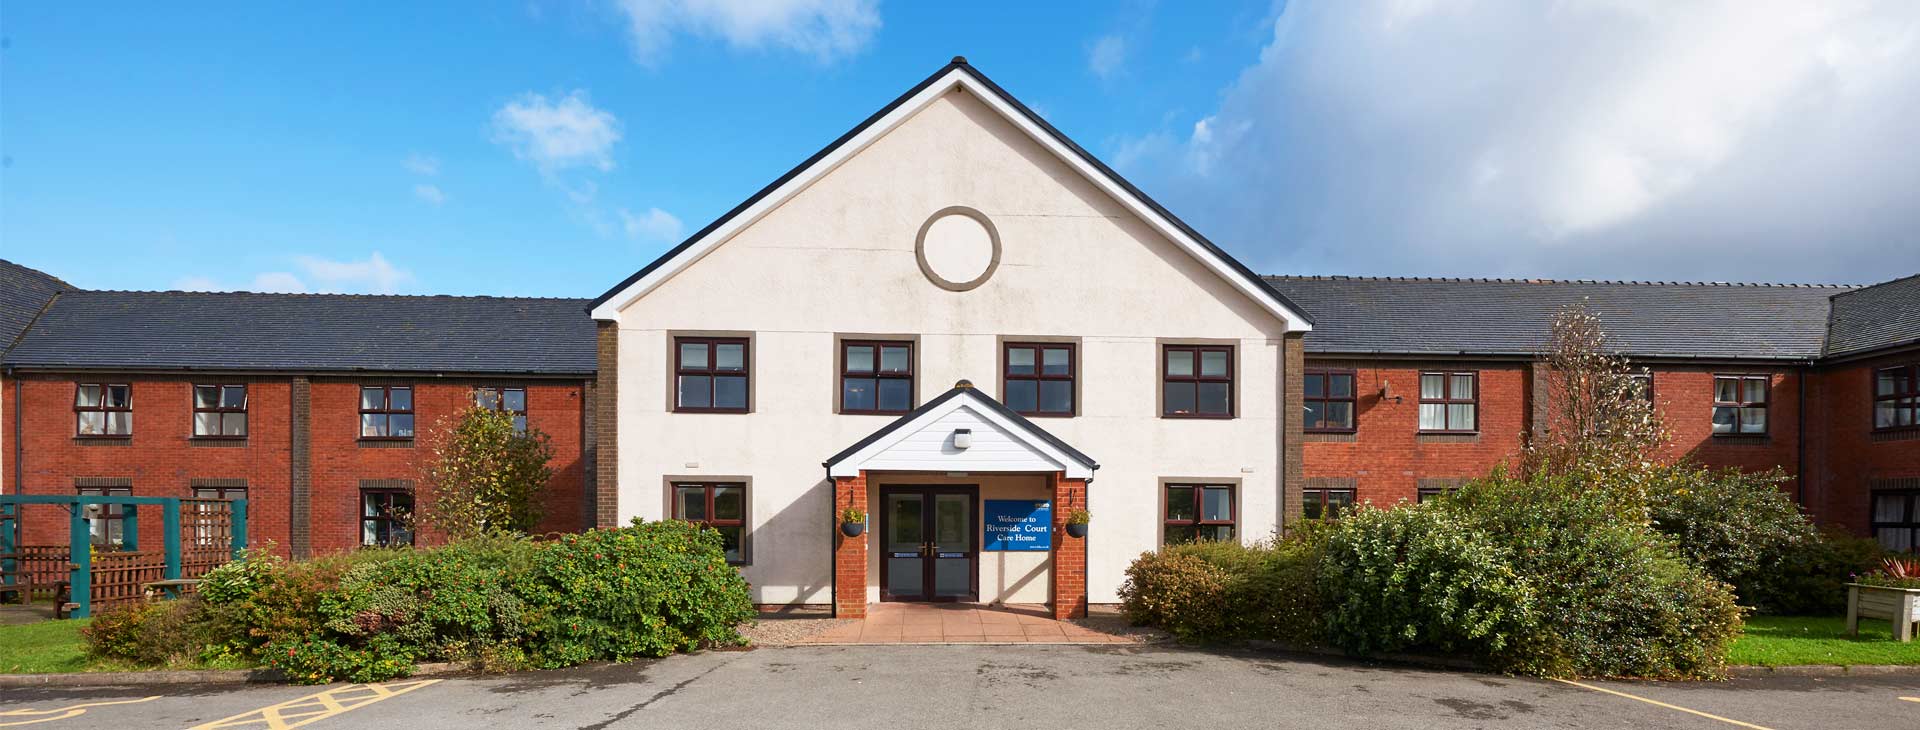 Riverside court care home